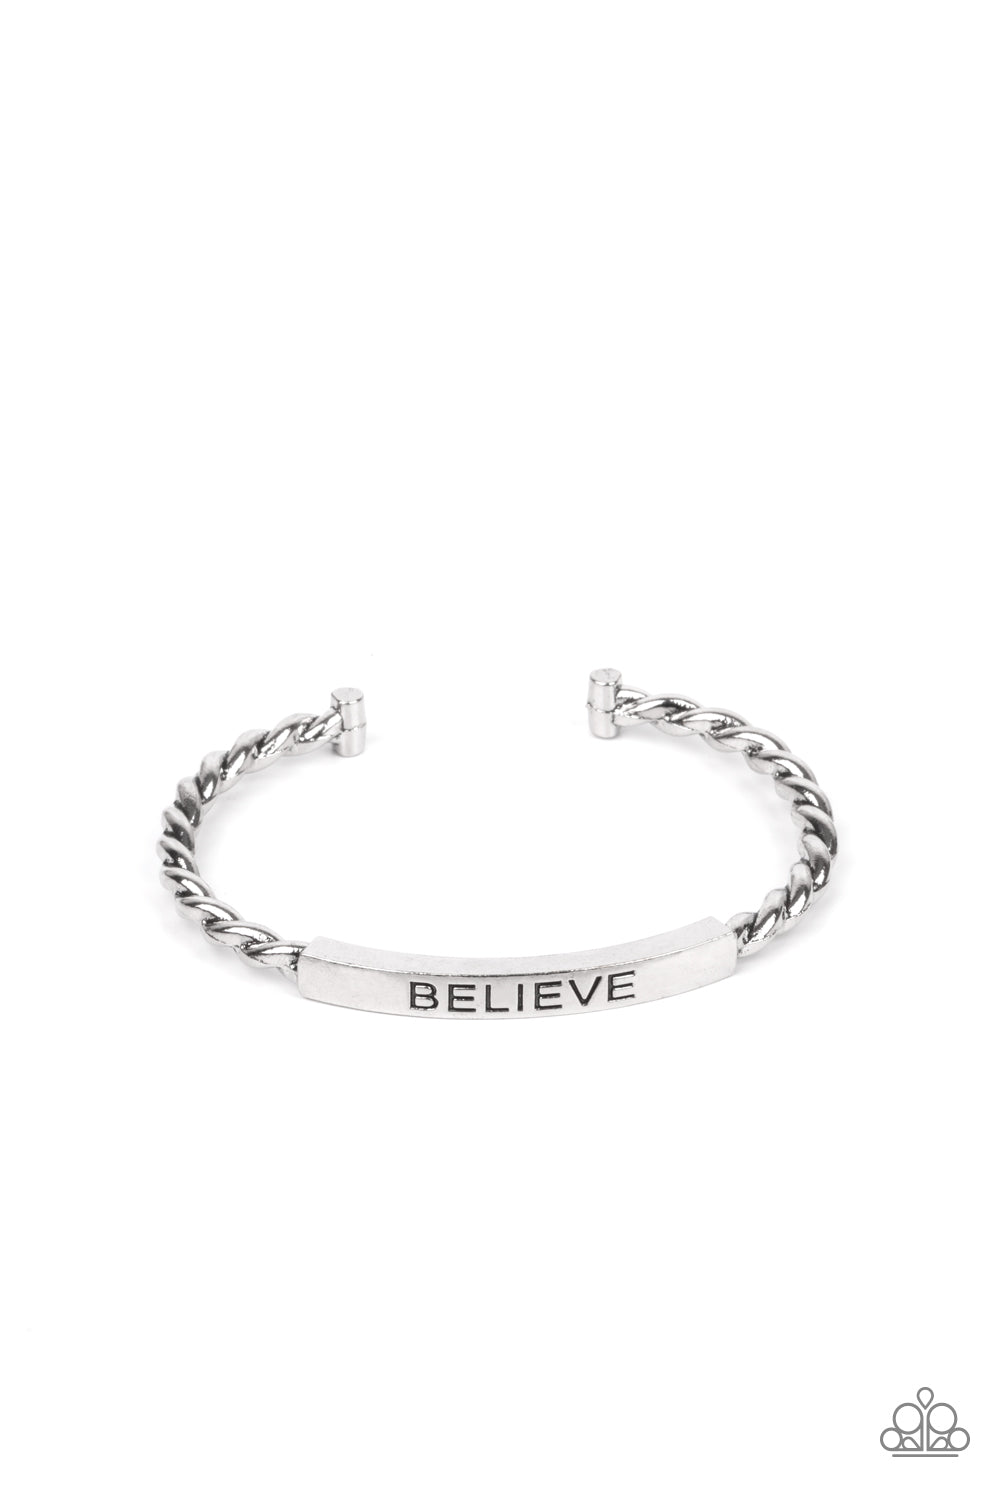 Twisted silver bars attach to a shiny silver plate stamped in the word, "BELIEVE," creating an inspiring cuff around the wrist.